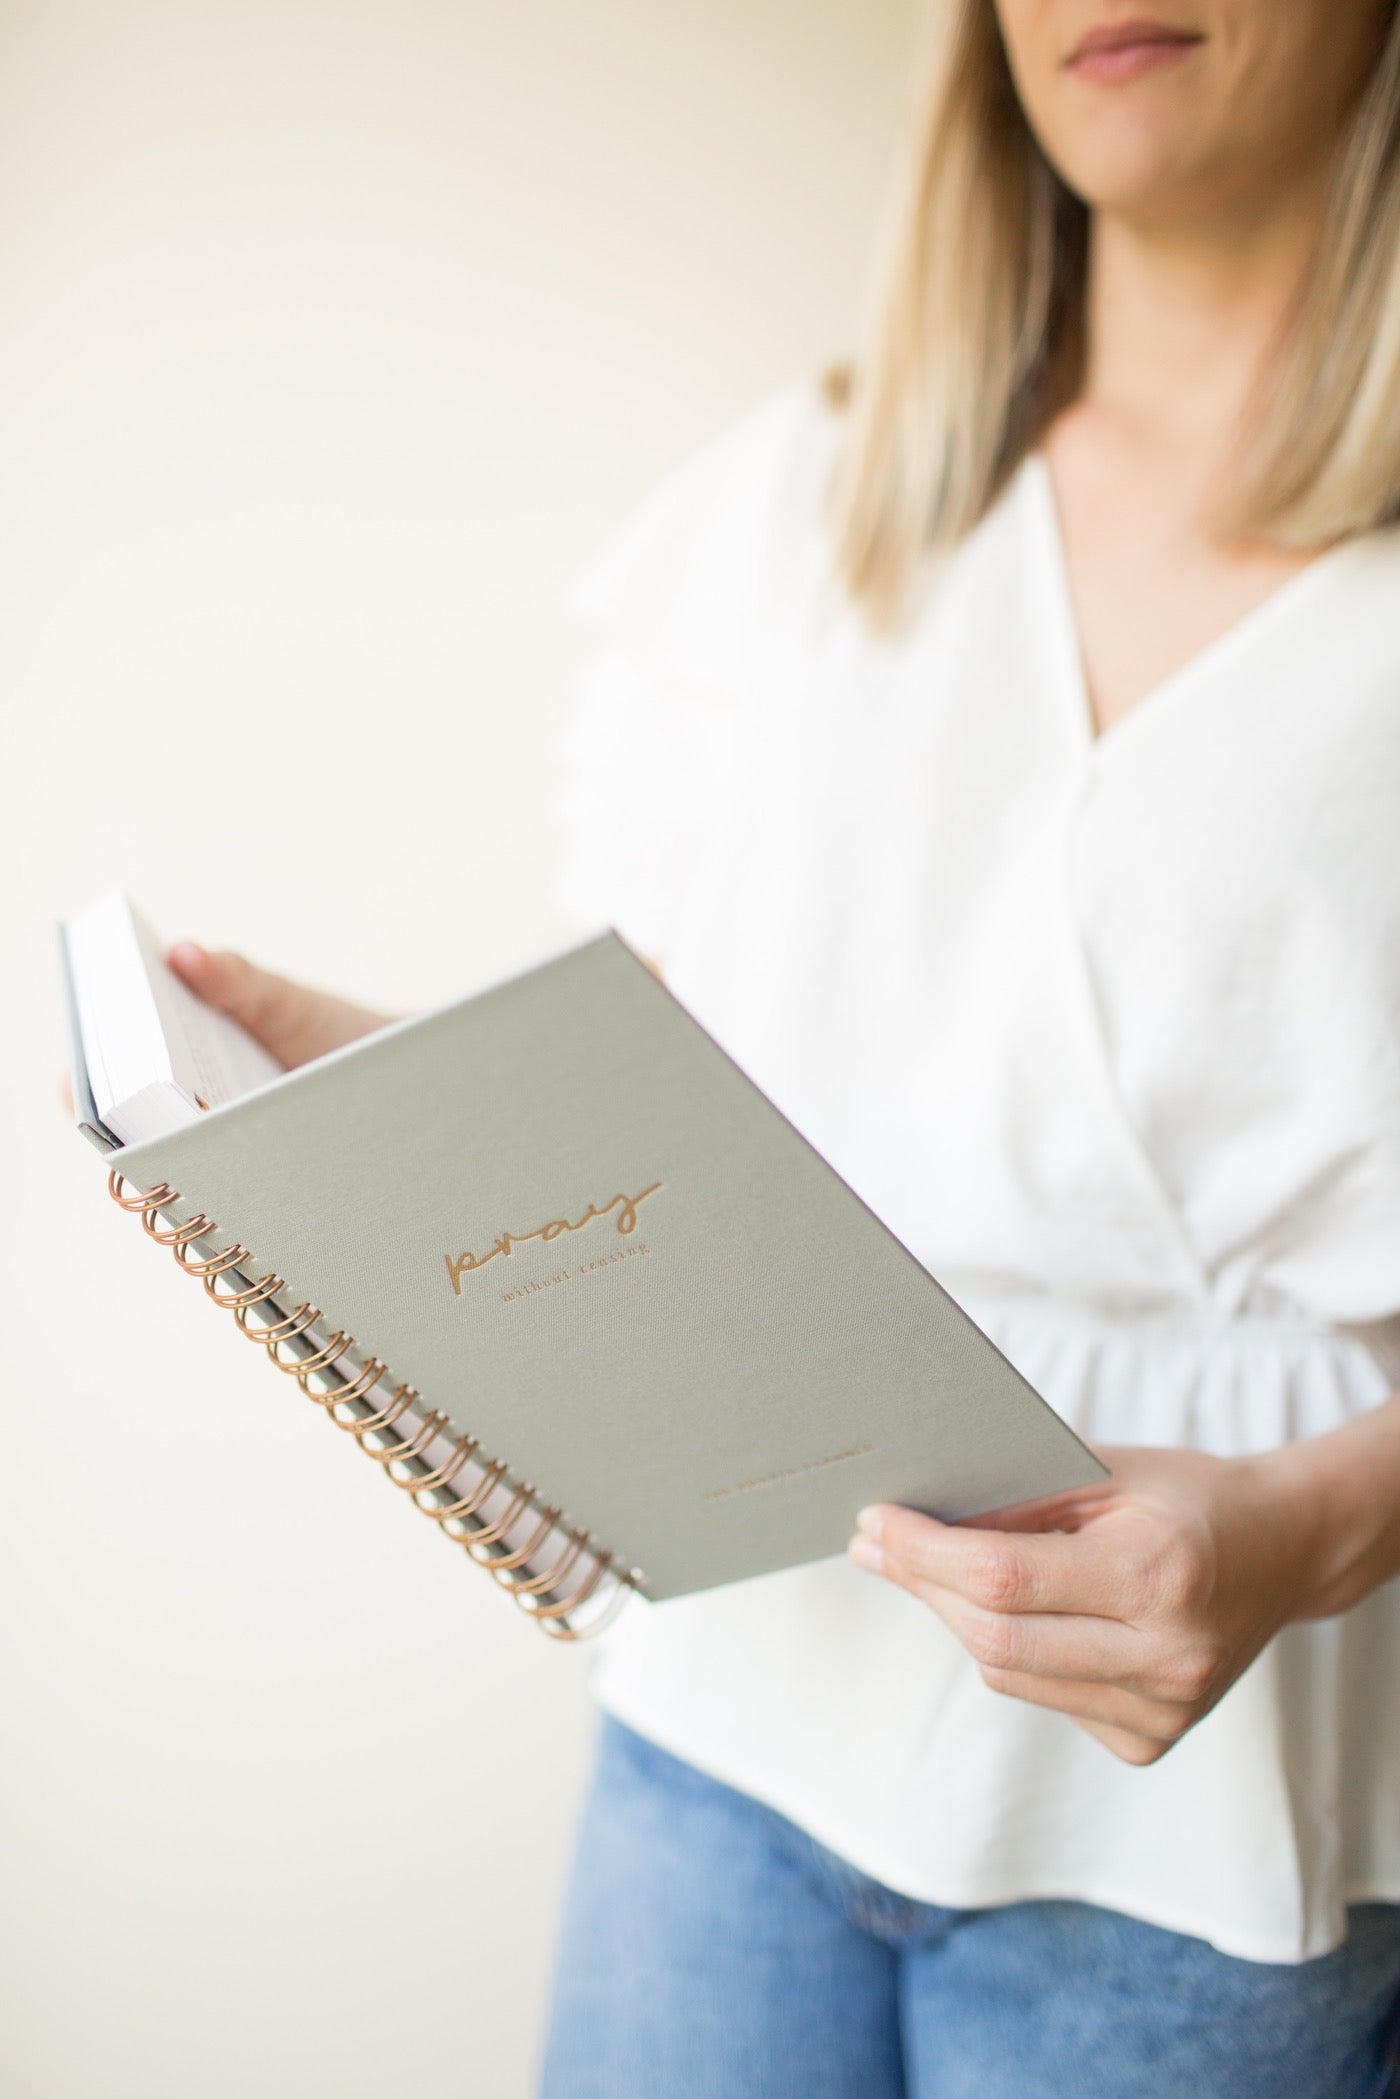 Plan your prayer time by using green prayer journal read by woman in white shirt